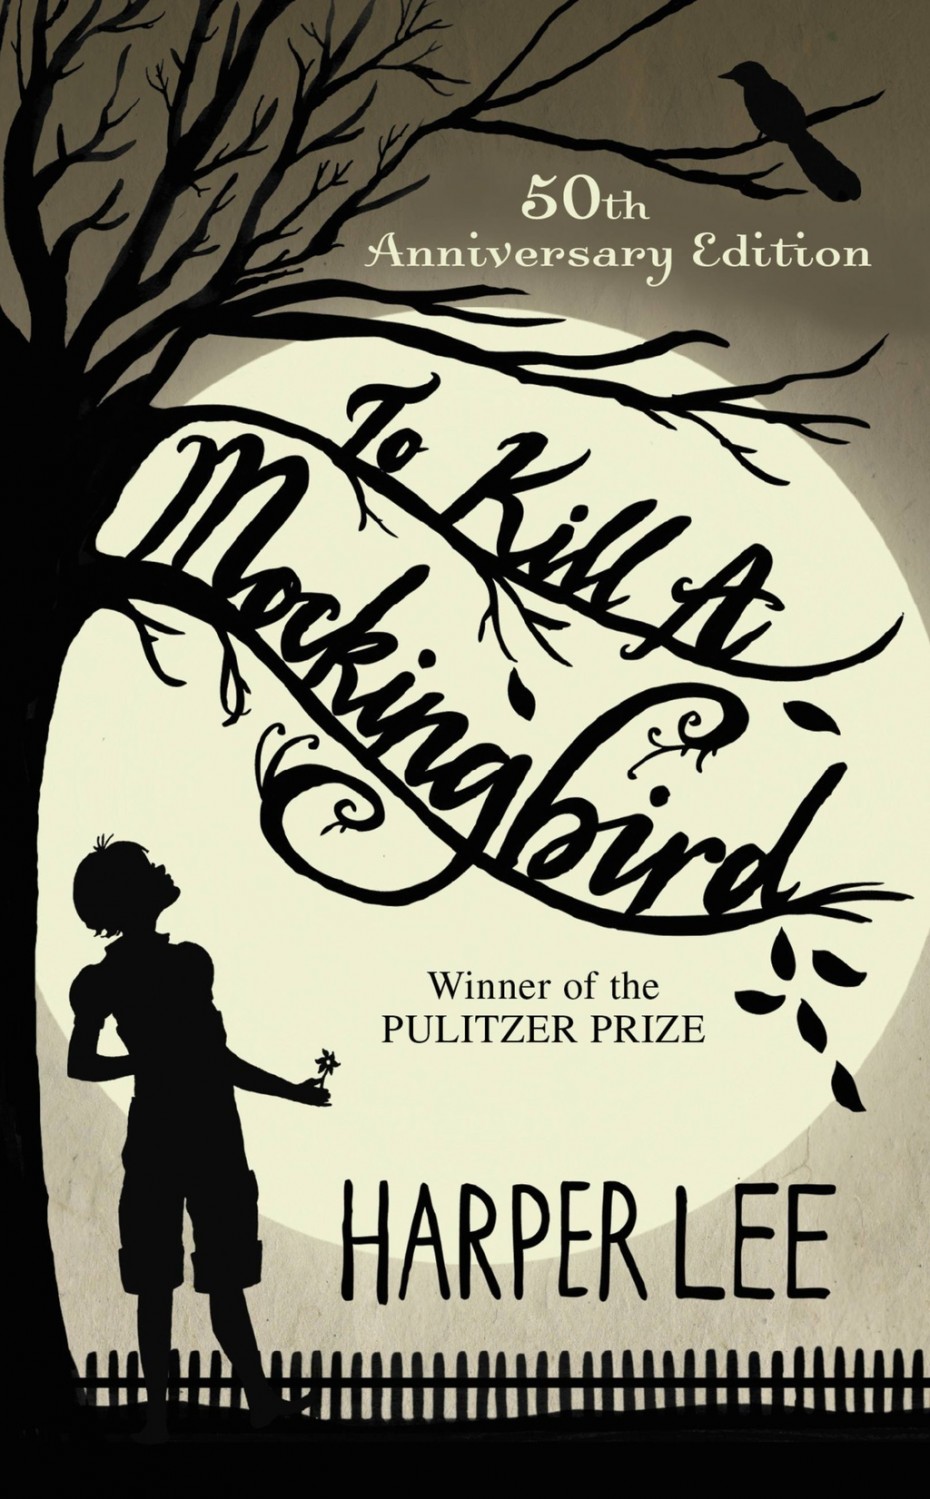 to-kill-a-mockingbird-words-hanging-on-the-tree-fb-quotes-about-love-and-frienship-930x1499.jpg